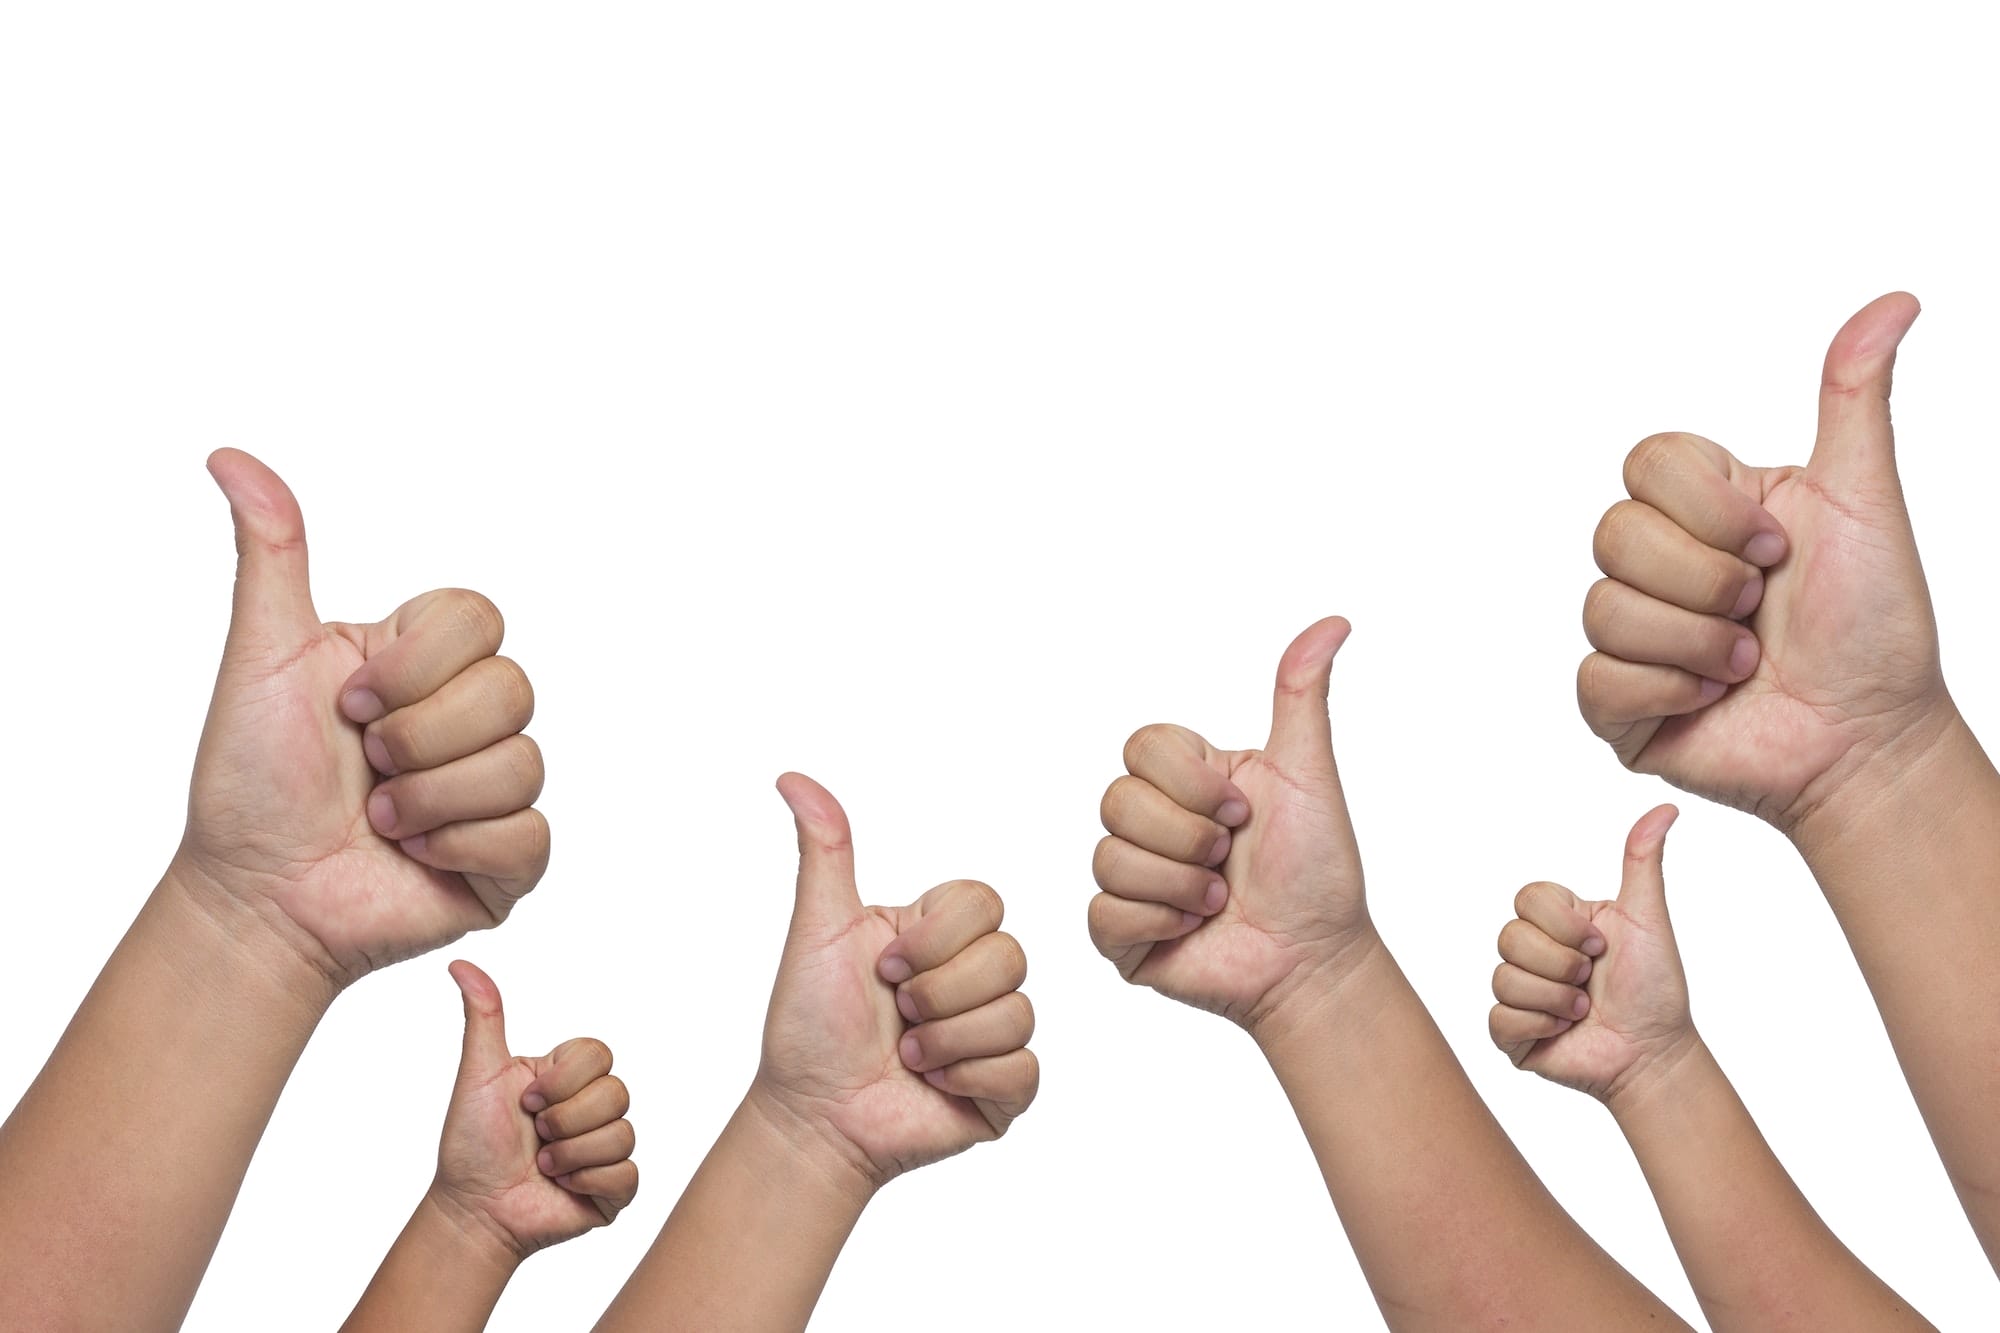 Many people congratulate a winner and holding their thumbs up on whitr background